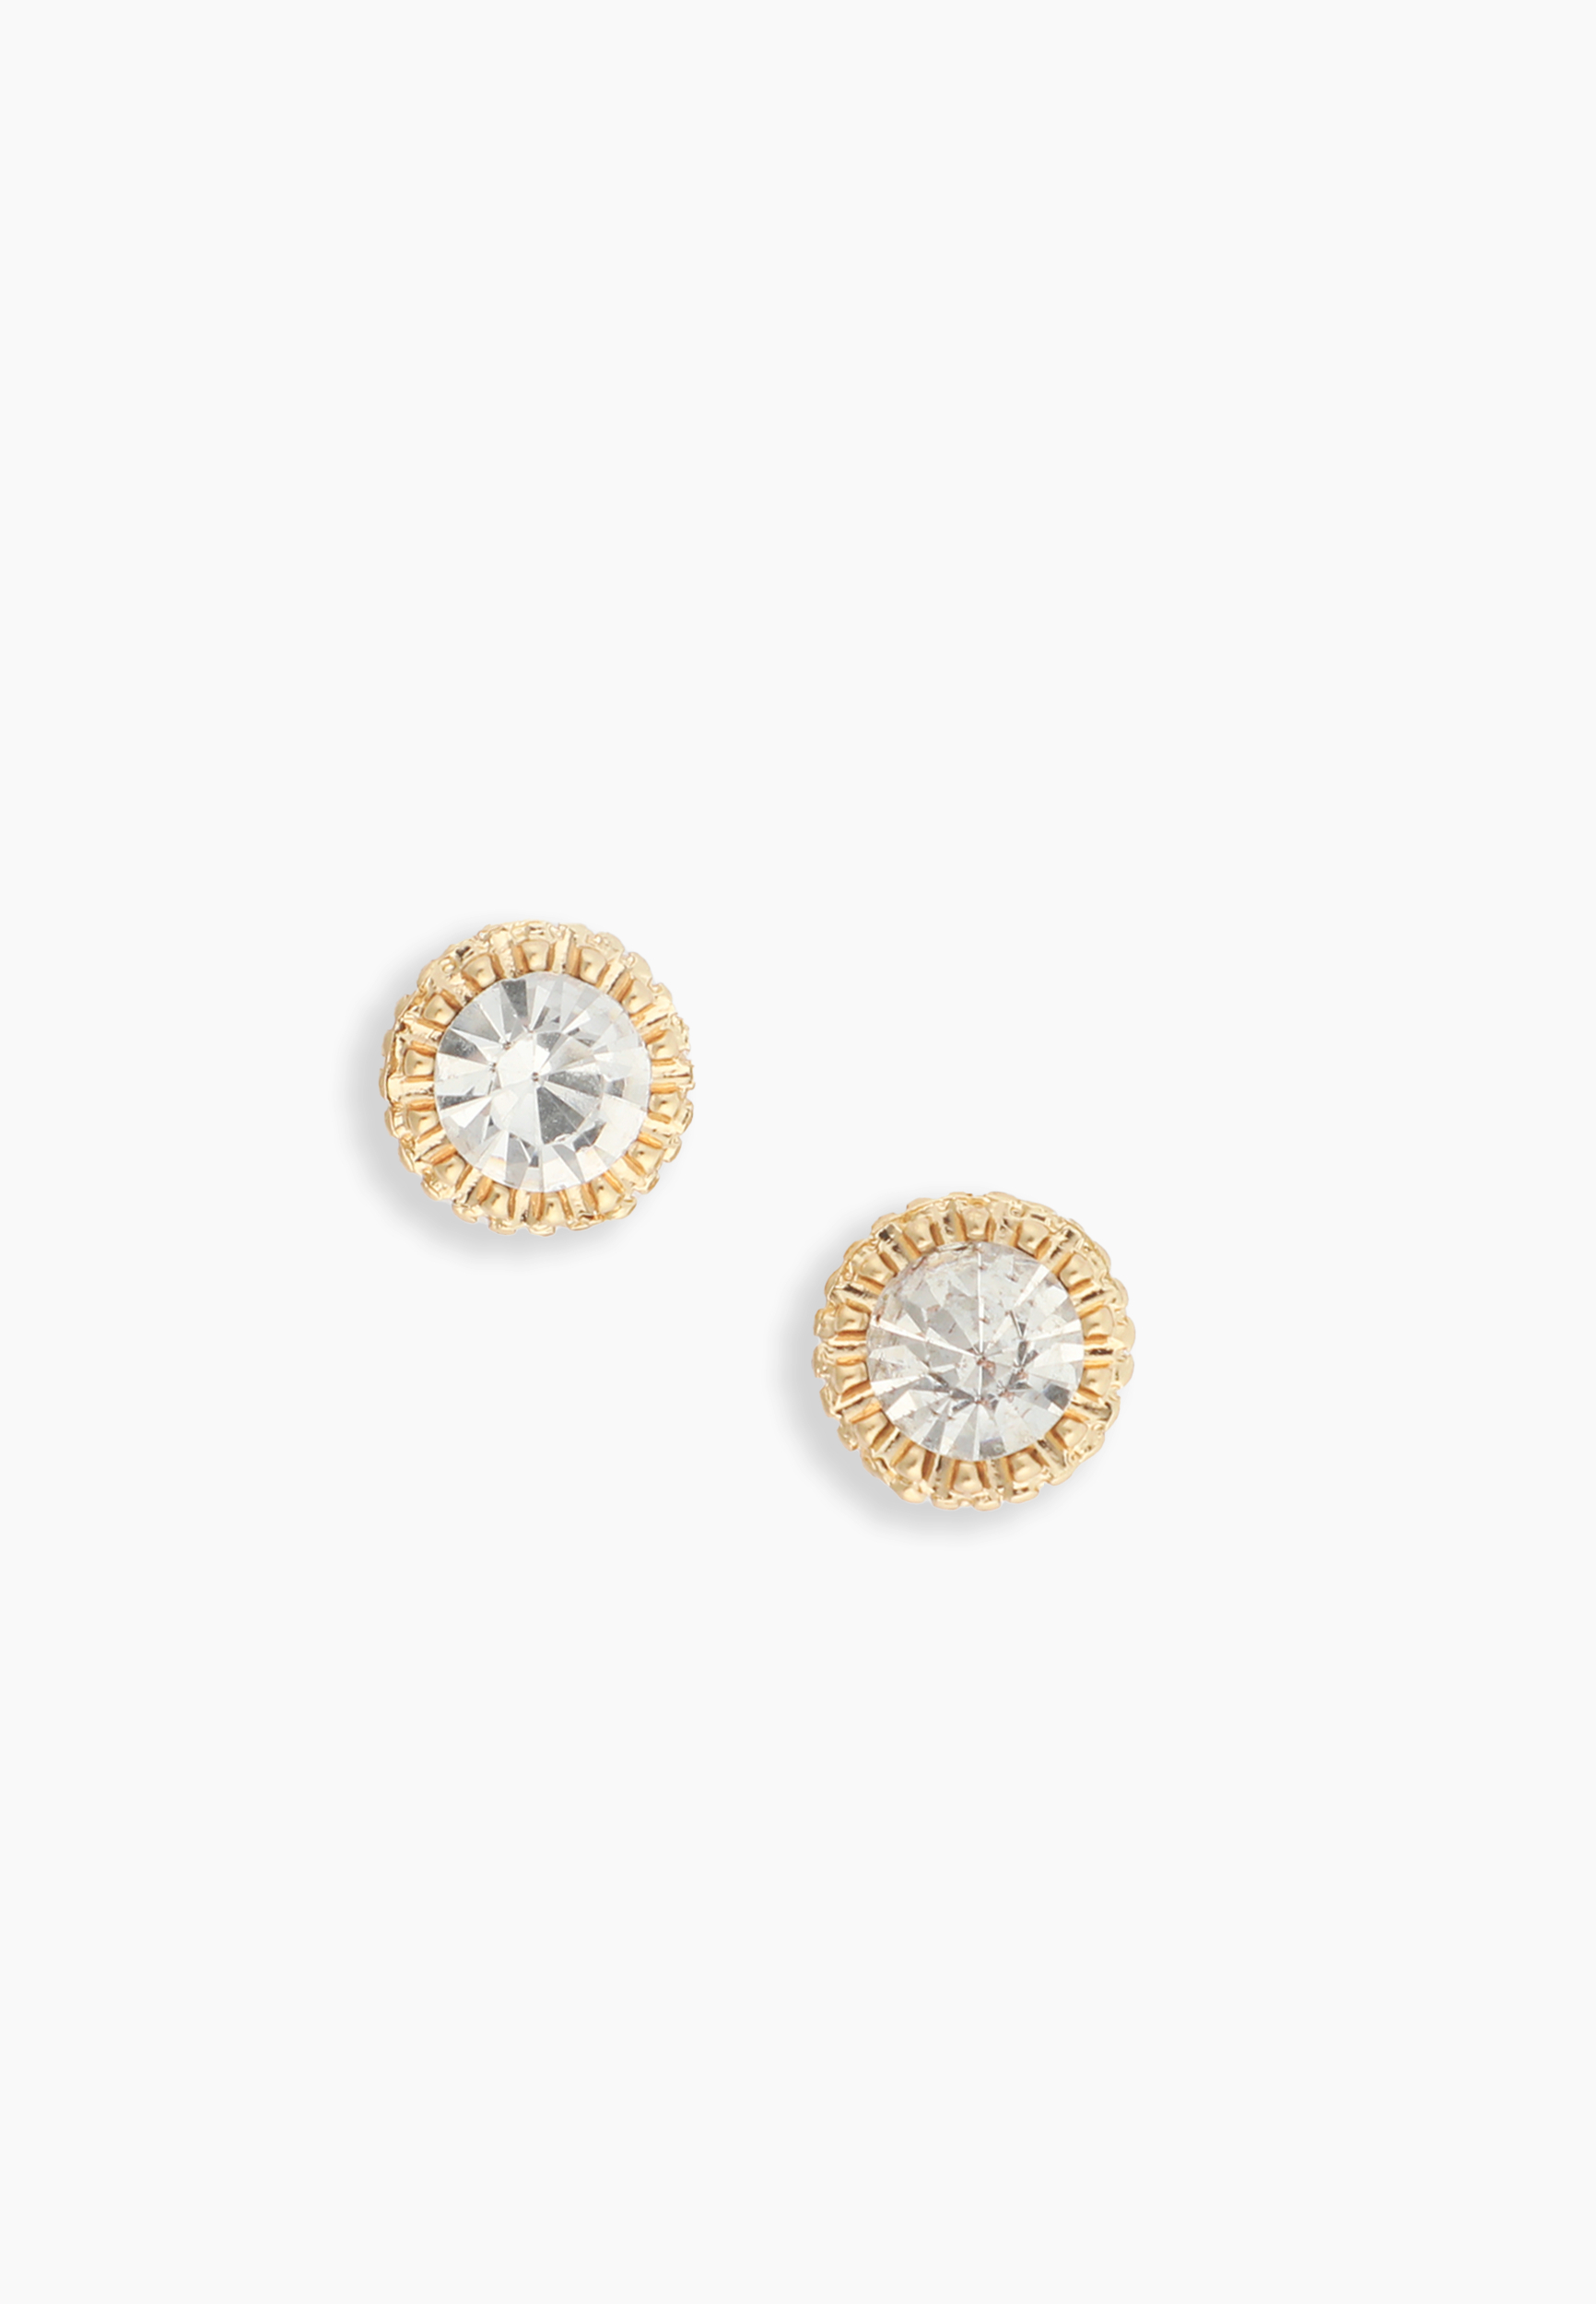 Gold Round Crystal Stud Earrings | maurices